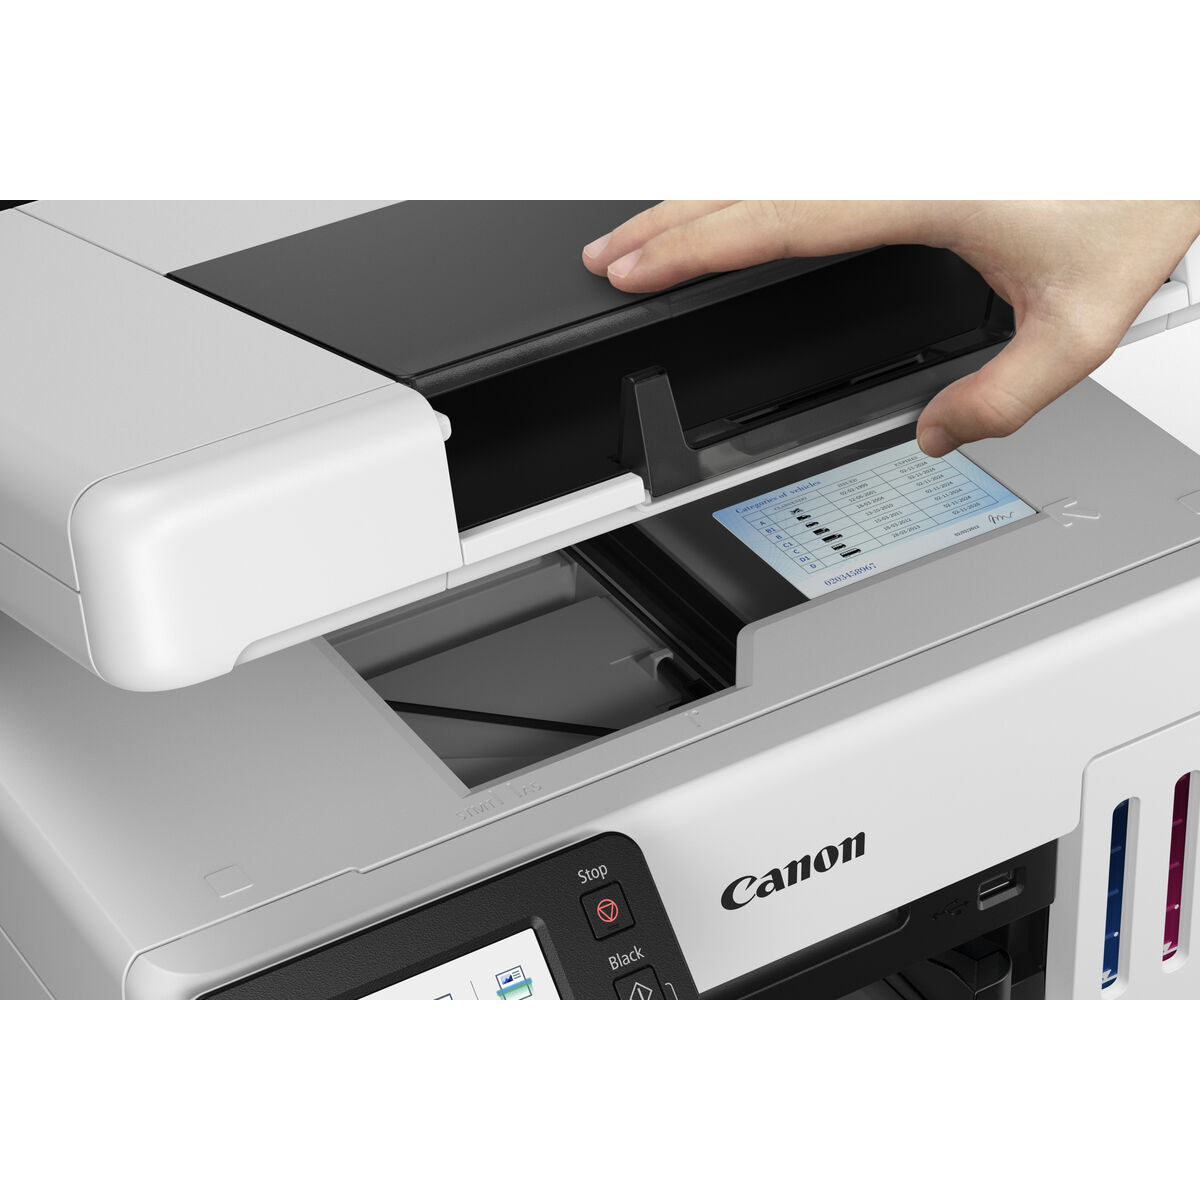 Multifunction Printer Canon MAXIFY GX6550, Canon, Computing, Printers and accessories, multifunction-printer-canon-maxify-gx6550, :Inkjet Printers, Brand_Canon, category-reference-2609, category-reference-2642, category-reference-2645, category-reference-t-19685, category-reference-t-19911, category-reference-t-21378, category-reference-t-25692, computers / peripherals, Condition_NEW, office, Price_500 - 600, Teleworking, RiotNook